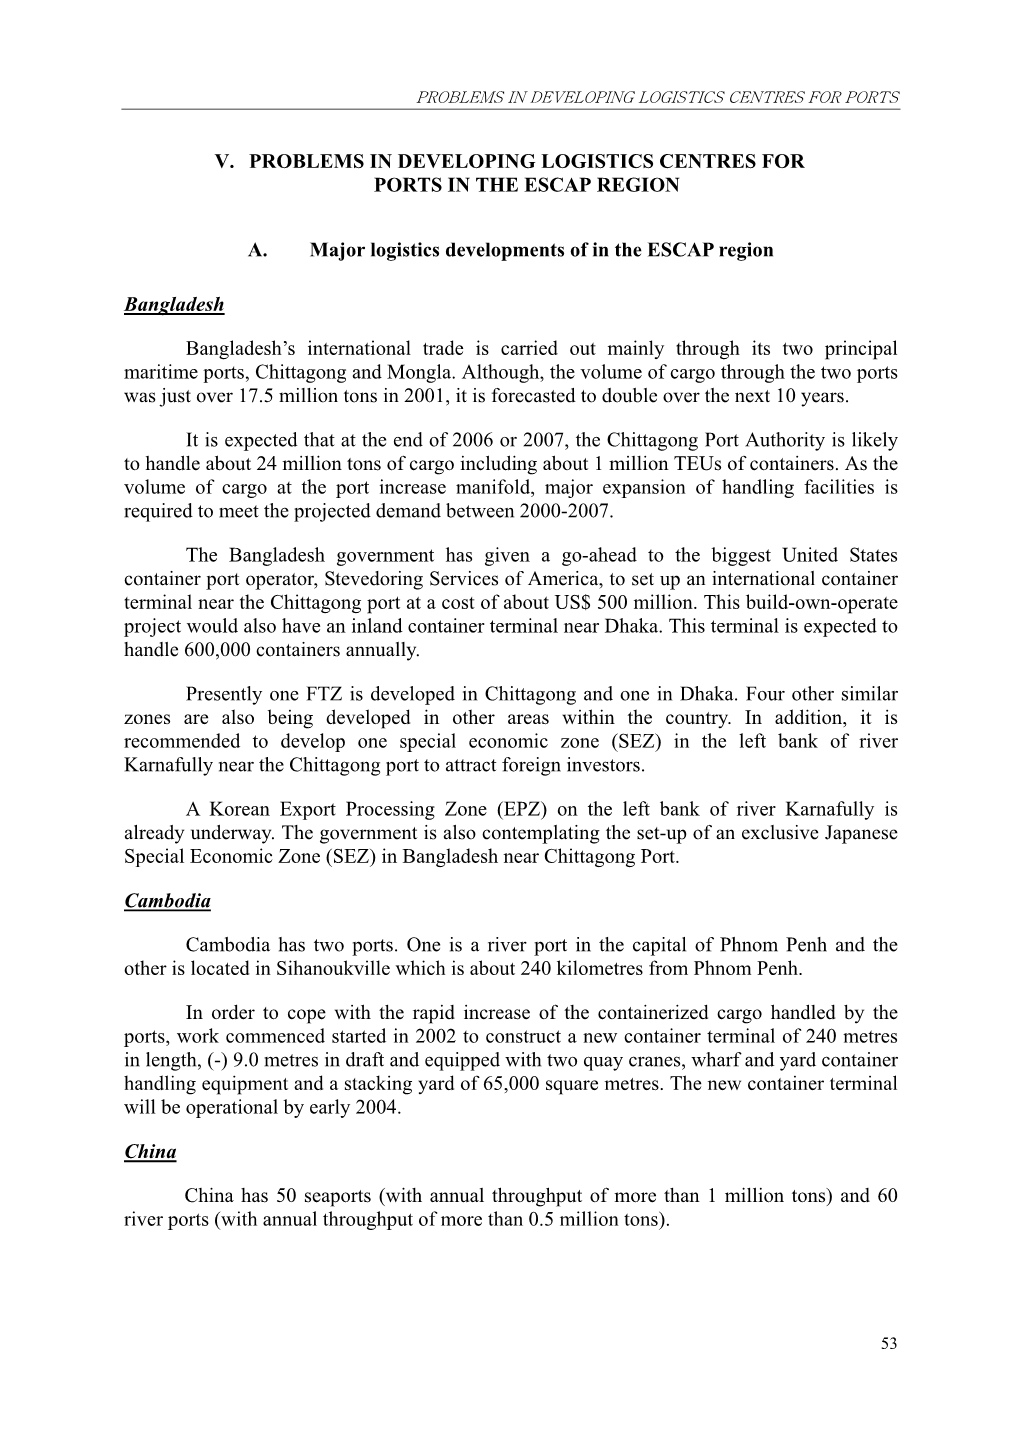 V. PROBLEMS in DEVELOPING LOGISTICS CENTRES for PORTS in the ESCAP REGION A. Major Logistics Developments of in the ESCAP Region